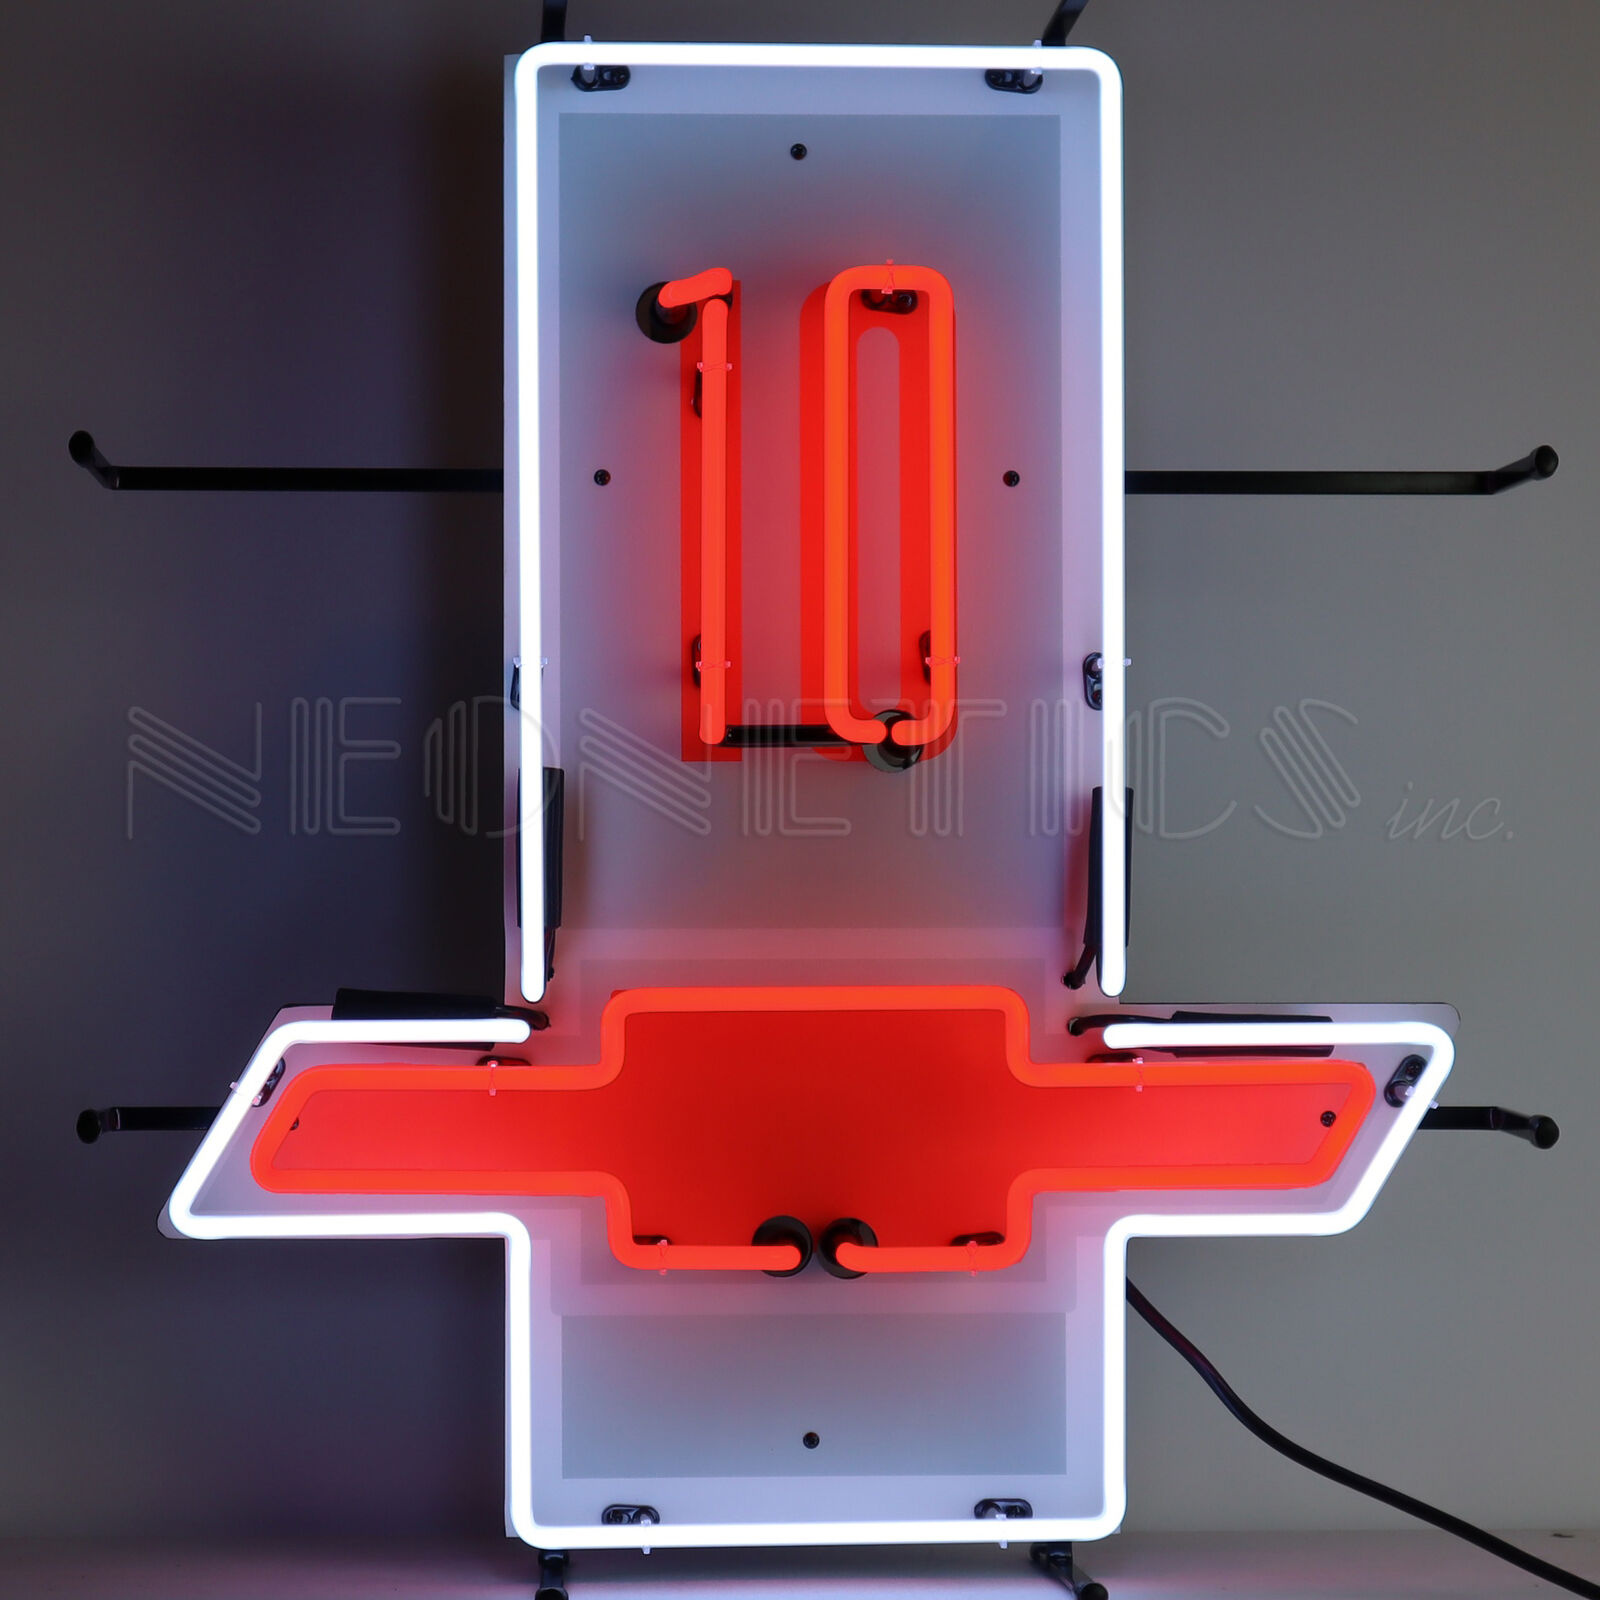 Man Cave Lamp CHEVROLET C10 TRUCK NEON SIGN WITH BACKING